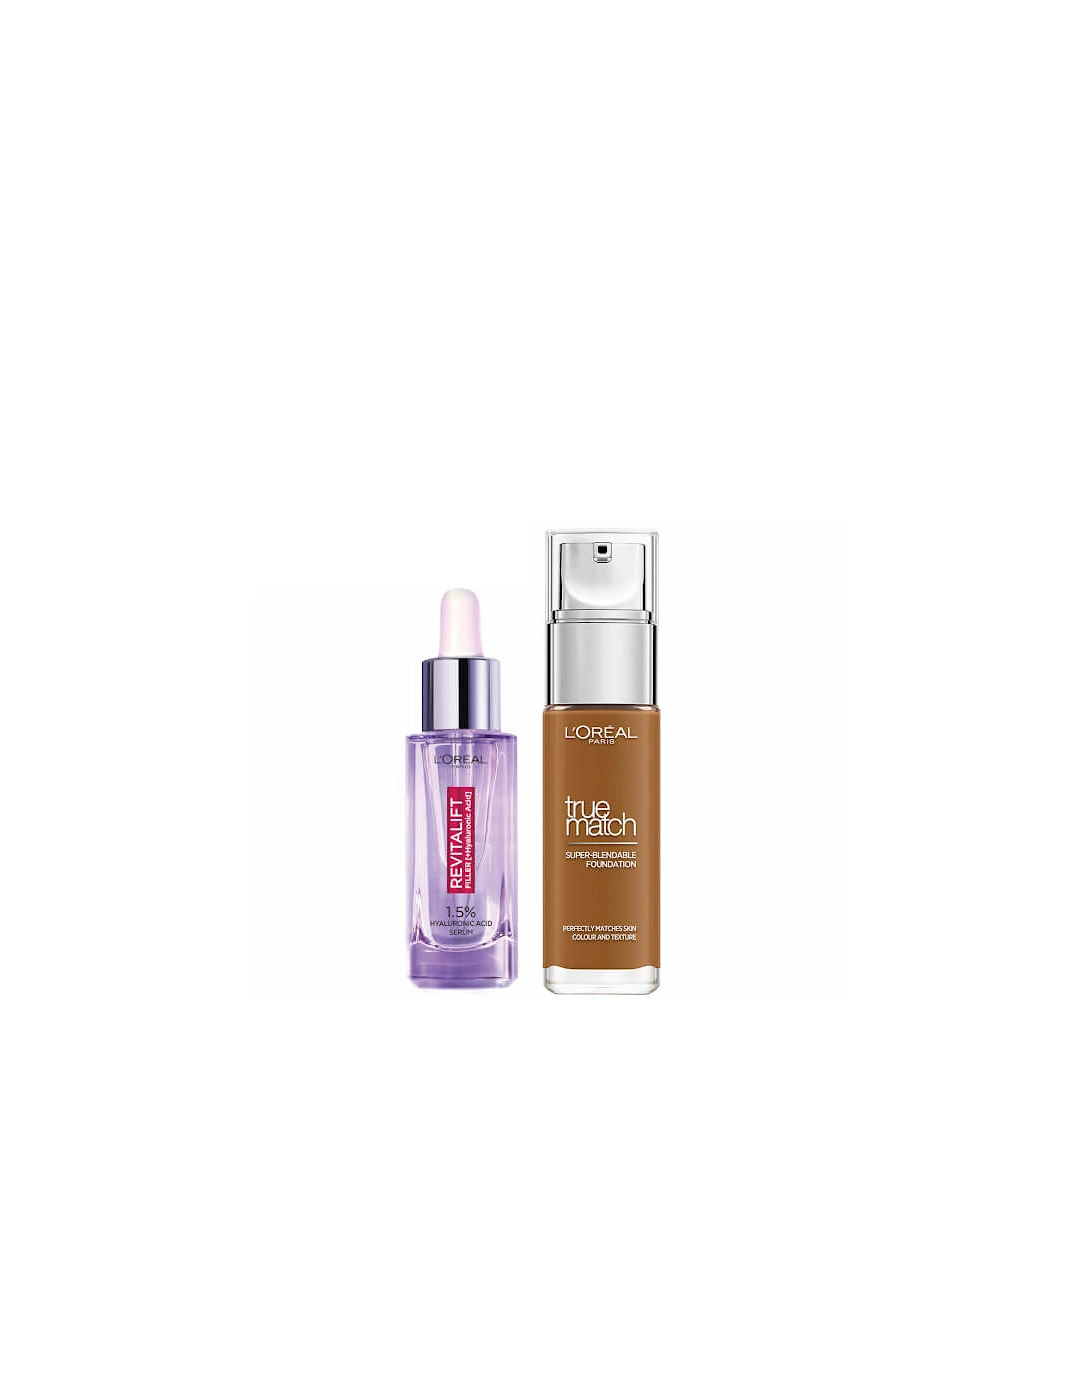 L’Oreal Paris Hyaluronic Acid Filler Serum and True Match Hyaluronic Acid Foundation Duo - 7.5W Golden Chestnut, 2 of 1